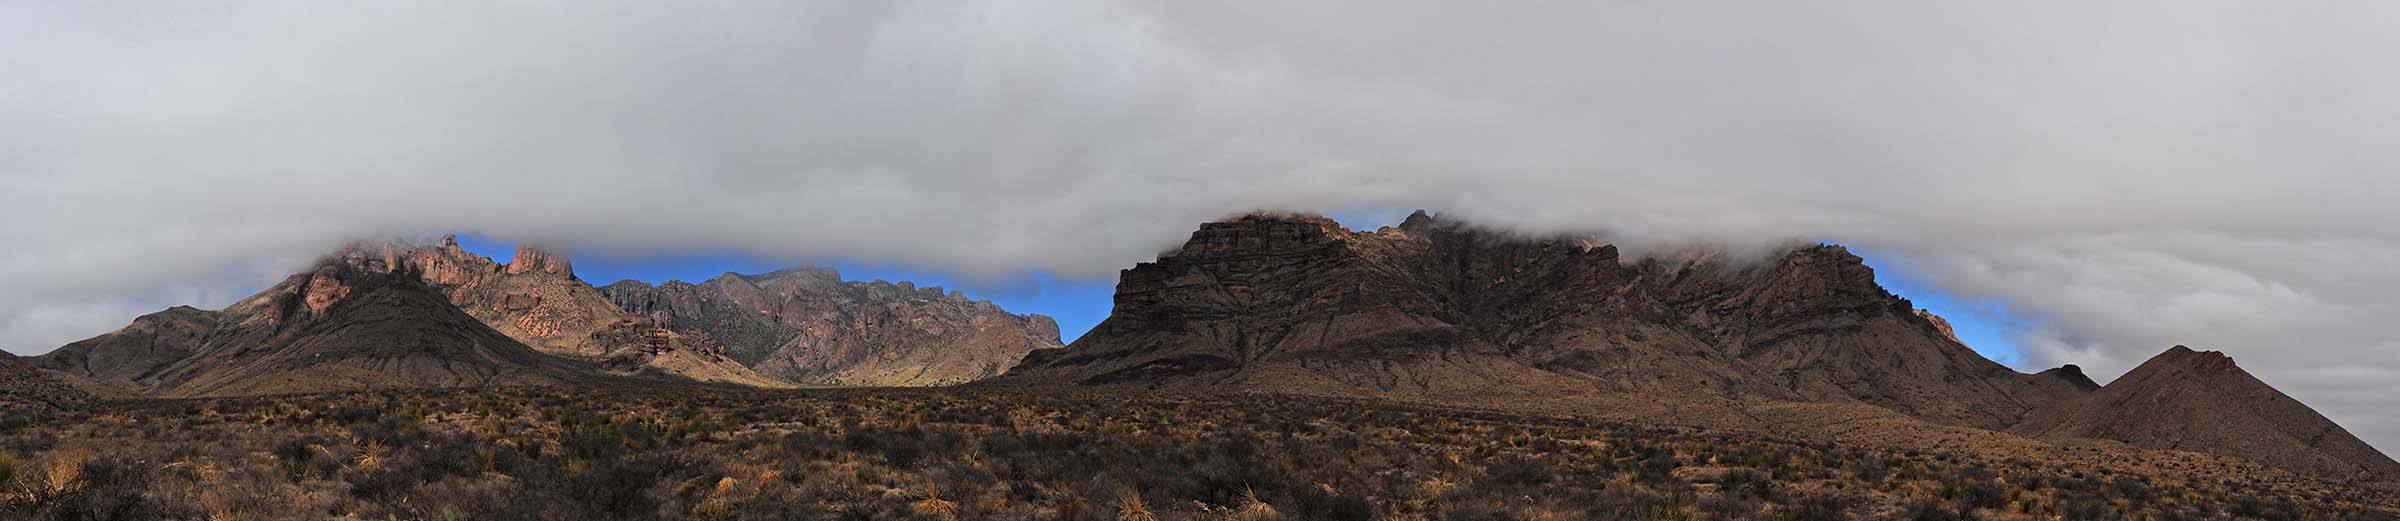 Chisos mountains in Big Bend NP